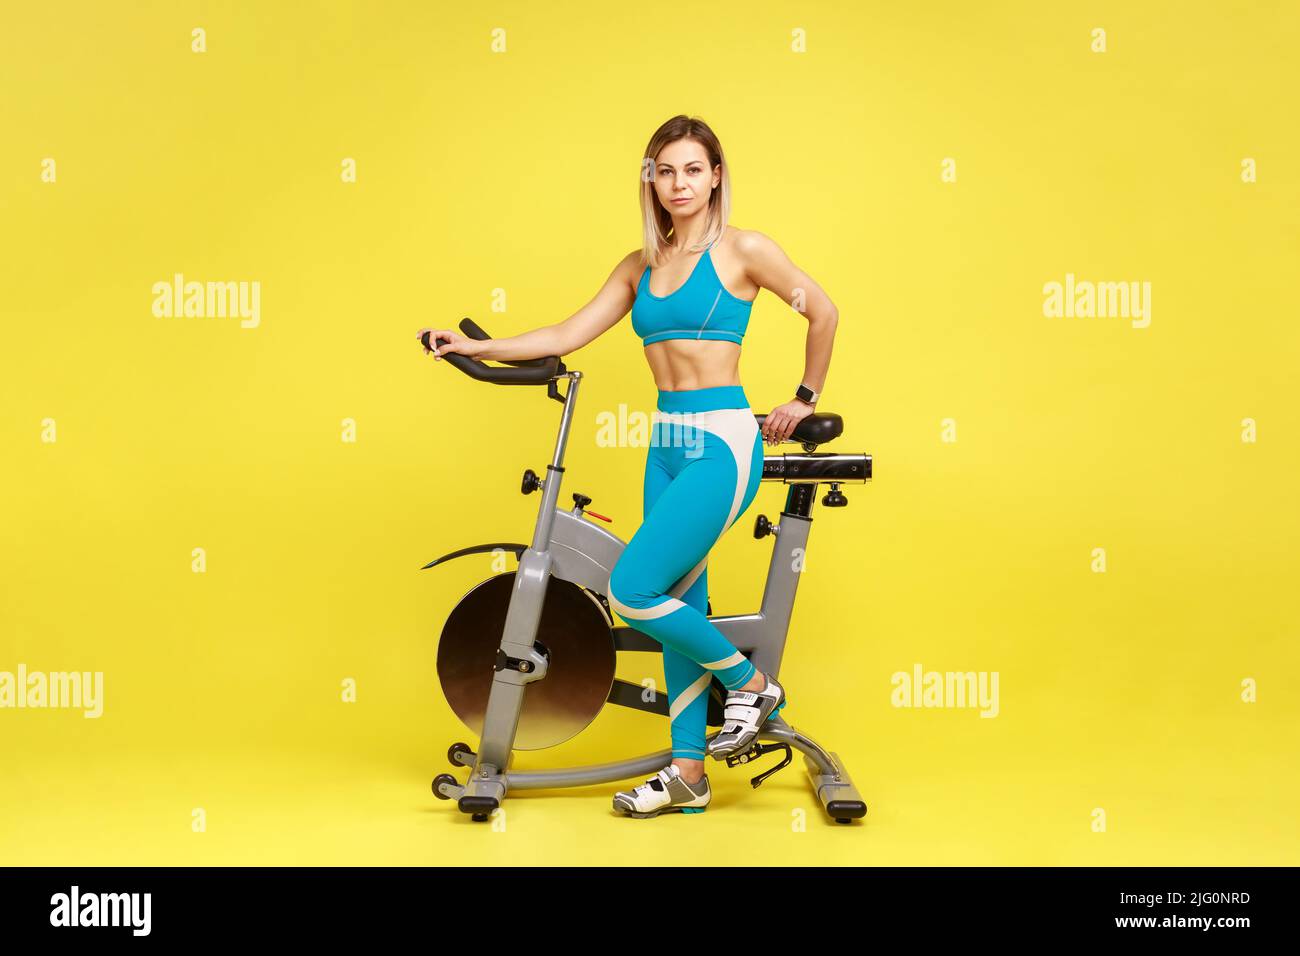 Full length portrait of attractive woman near cycle simulator and looking at camera, doing cardio workout, wearing blue sportswear. Indoor studio shot isolated on yellow background. Stock Photo